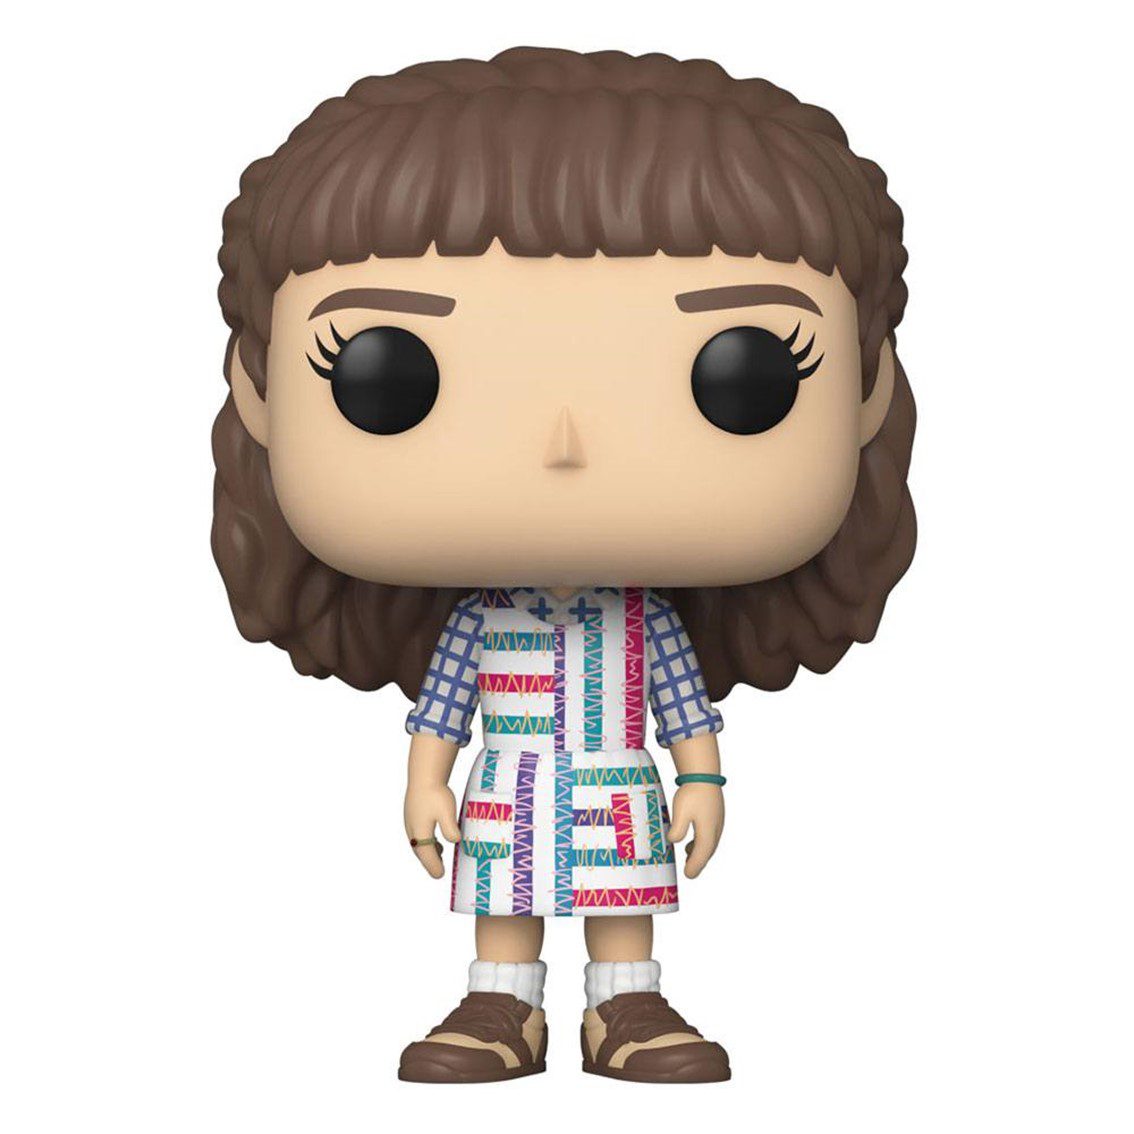 889698623889-PN-62388-Cod.-Articulo-MGS0000011811-Funko-pop-series-tv-stranger-things-s4-eleven-62388-1